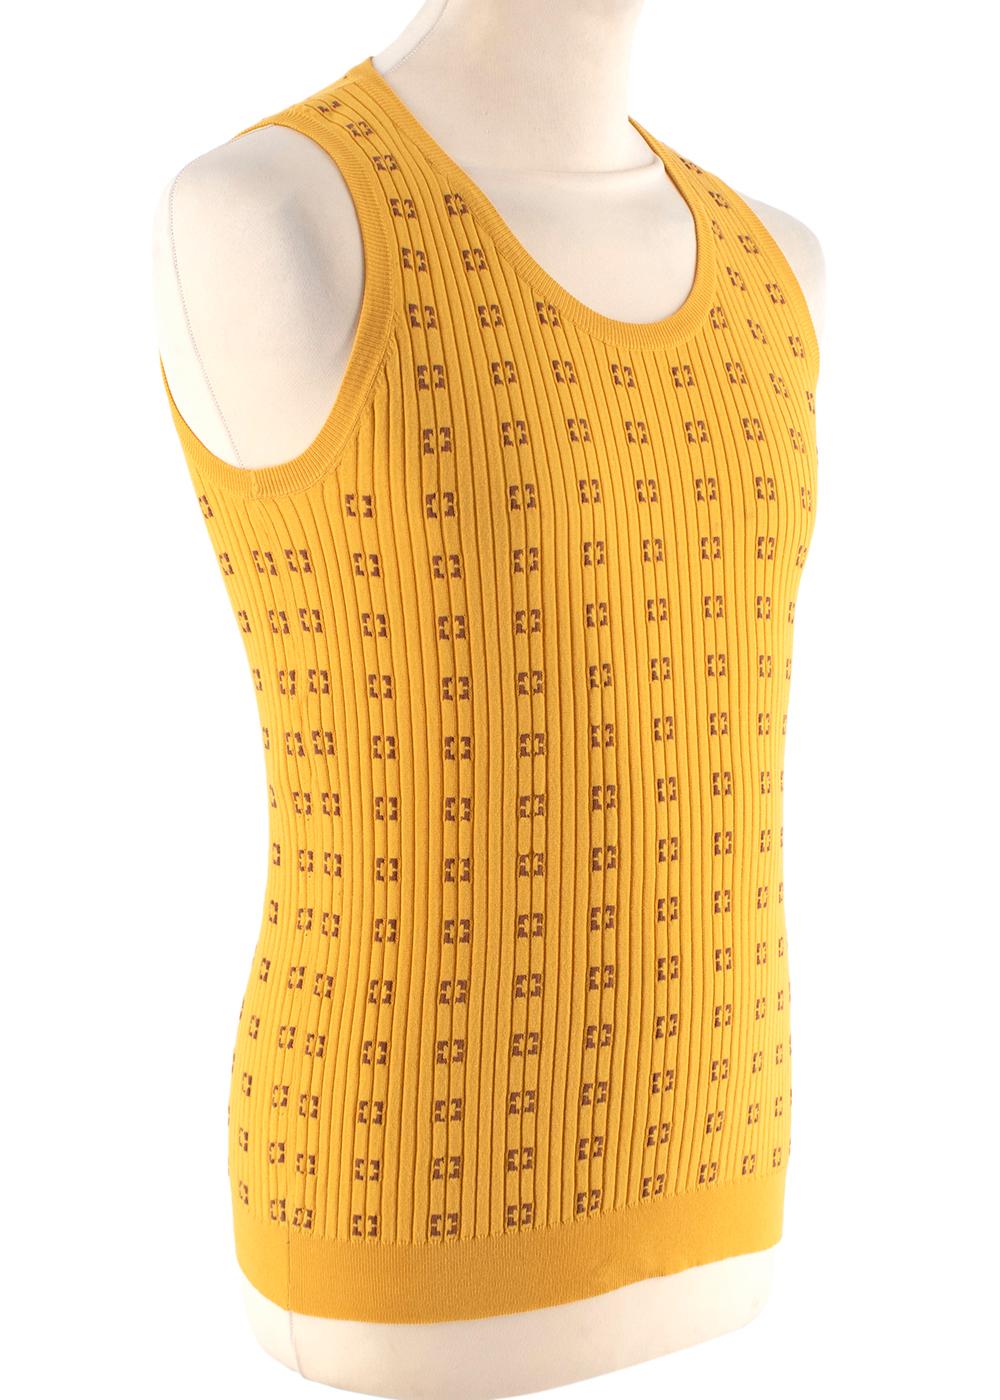 Marni Yellow Ribbed Cotton Tank Top

- Scoop neck, sleeveless tank top
- Small brown squares pattern
- Wear on its own, or layered under an open shirt or jacket

Materials:
100% Cotton

Made in Italy 
Hand wash only 

9.5/10 excellent condition with